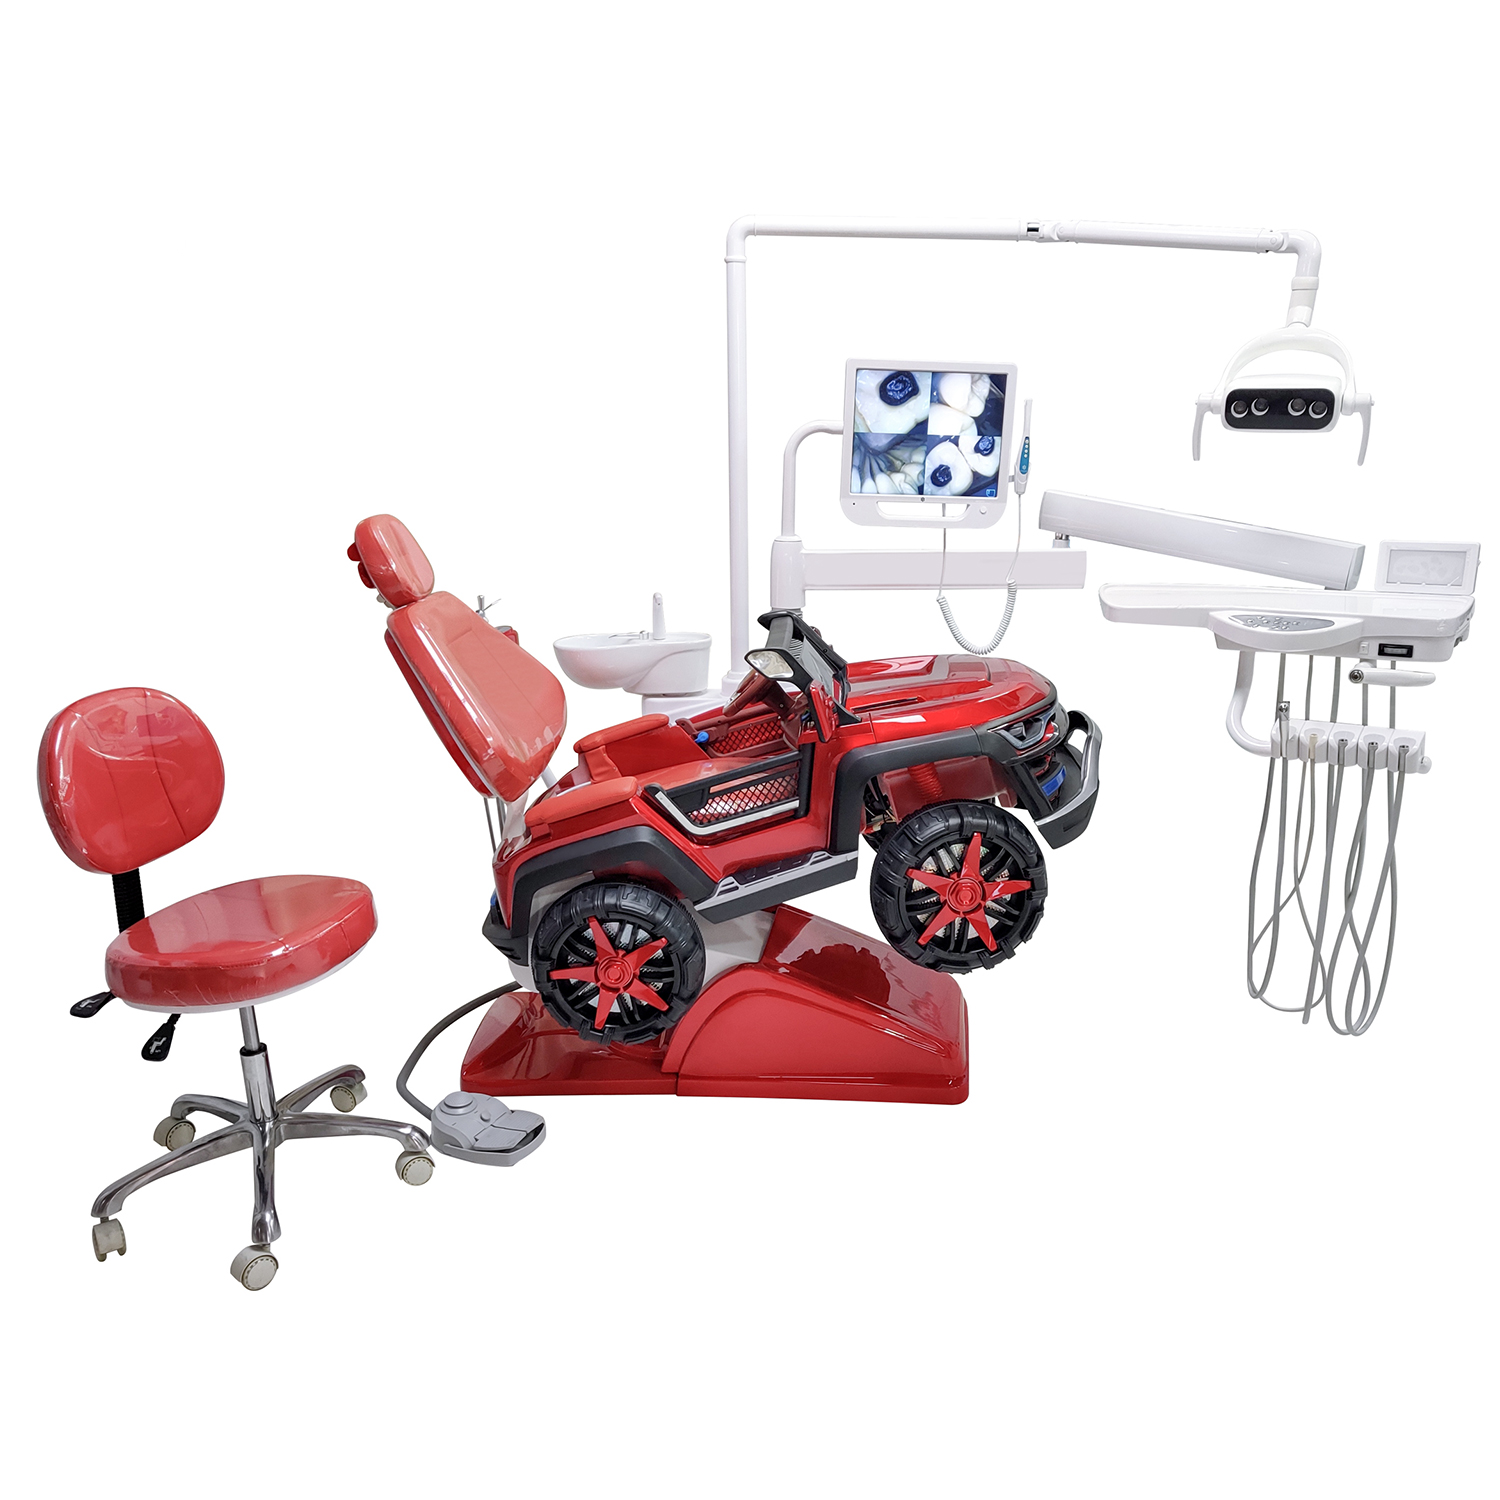 Dental Chair Led Light Price Exporters –  Economic Kids Dental Chair Q1 With Music – Lingchen